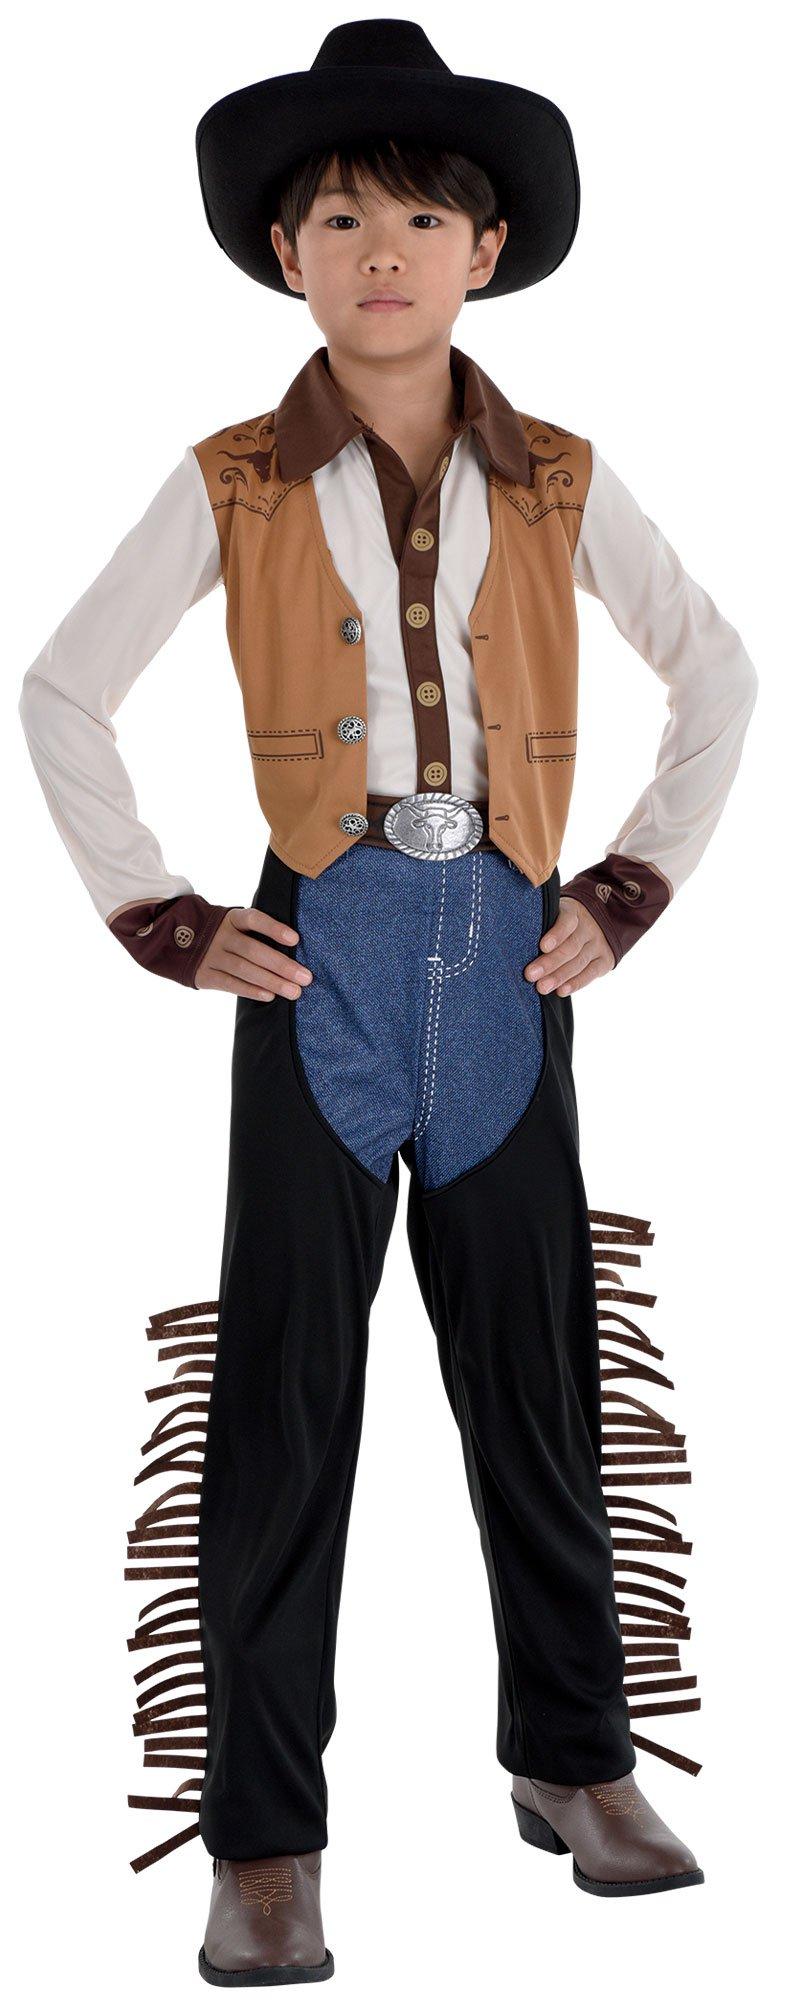 Kids' Western Cowboy Costume with Chaps